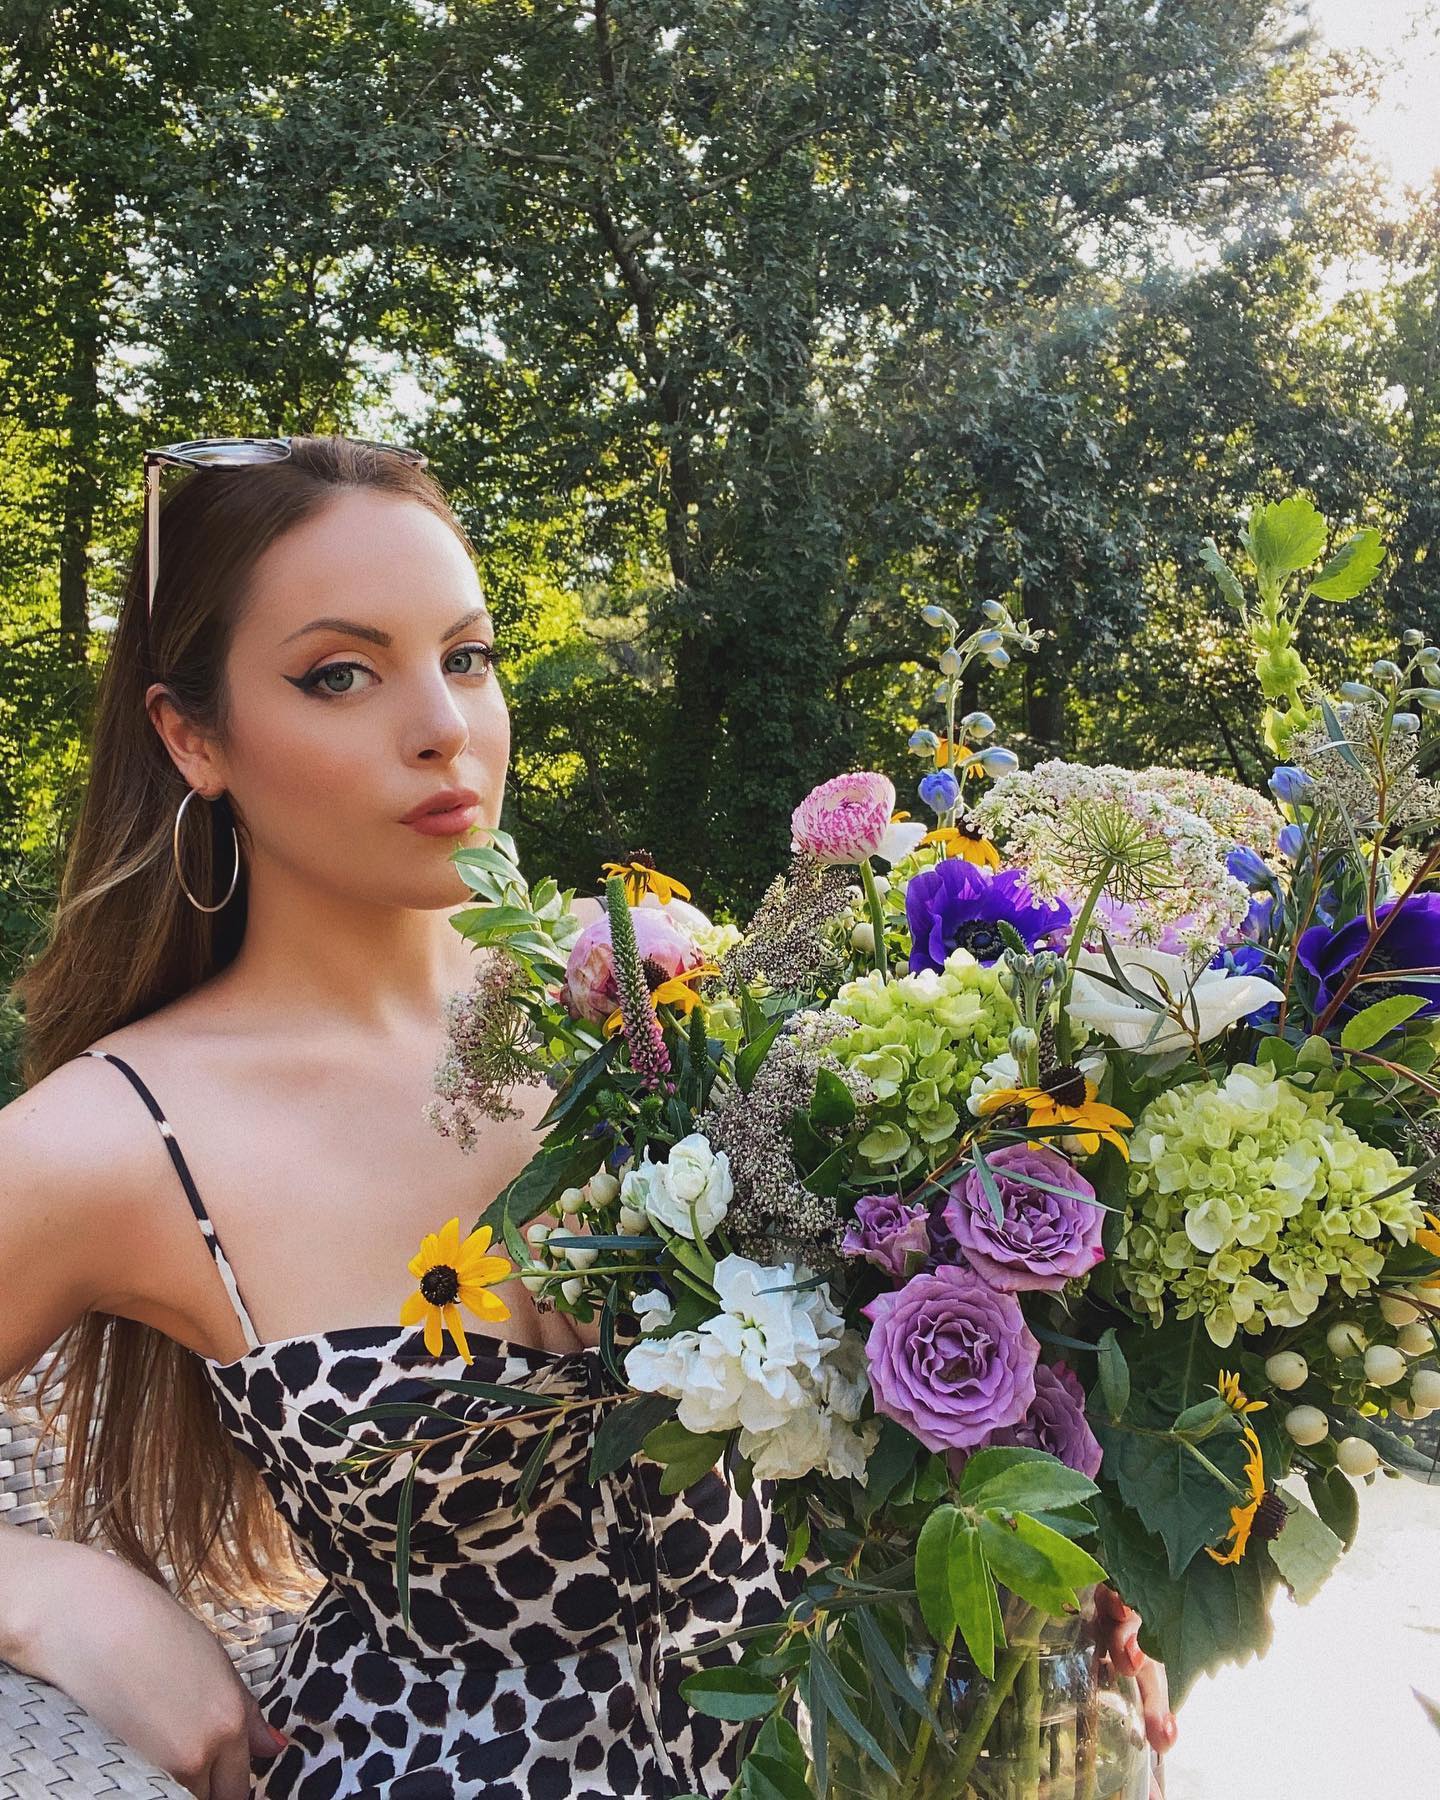 Stop And Smell Elizabeth Gillies’ Flowers!